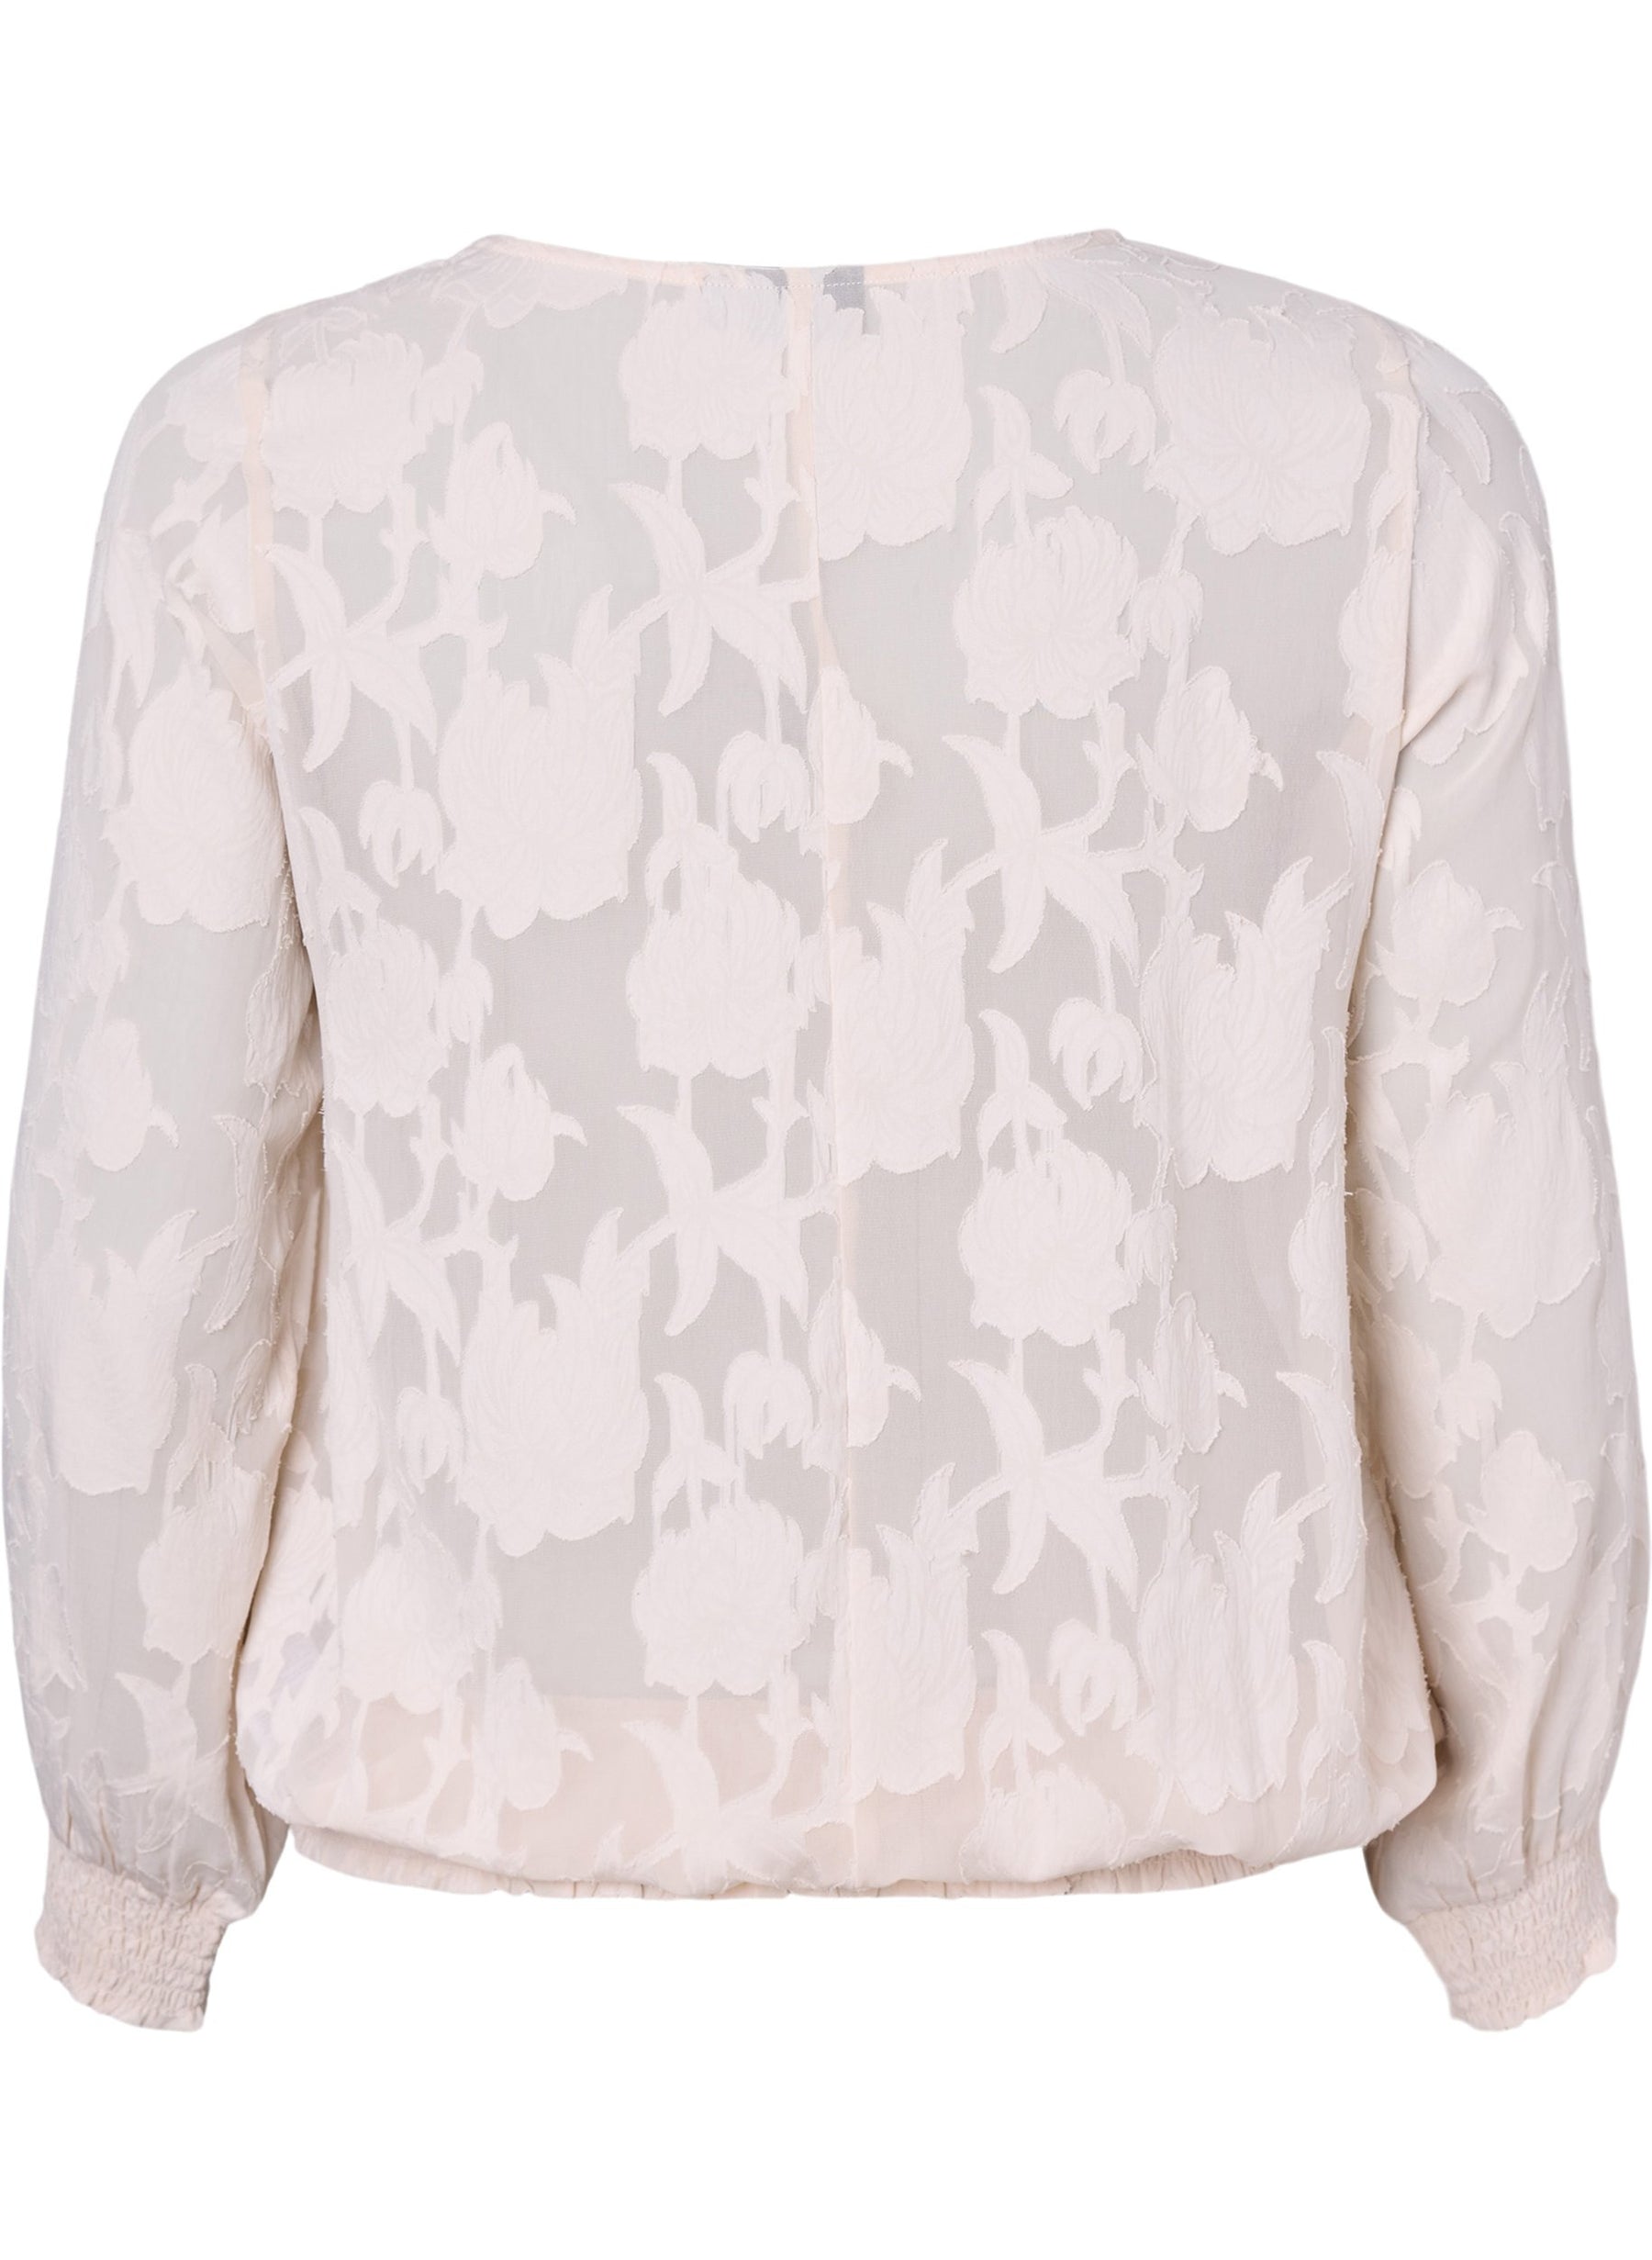 Zizzi Floral Smocked Blouse in Off White